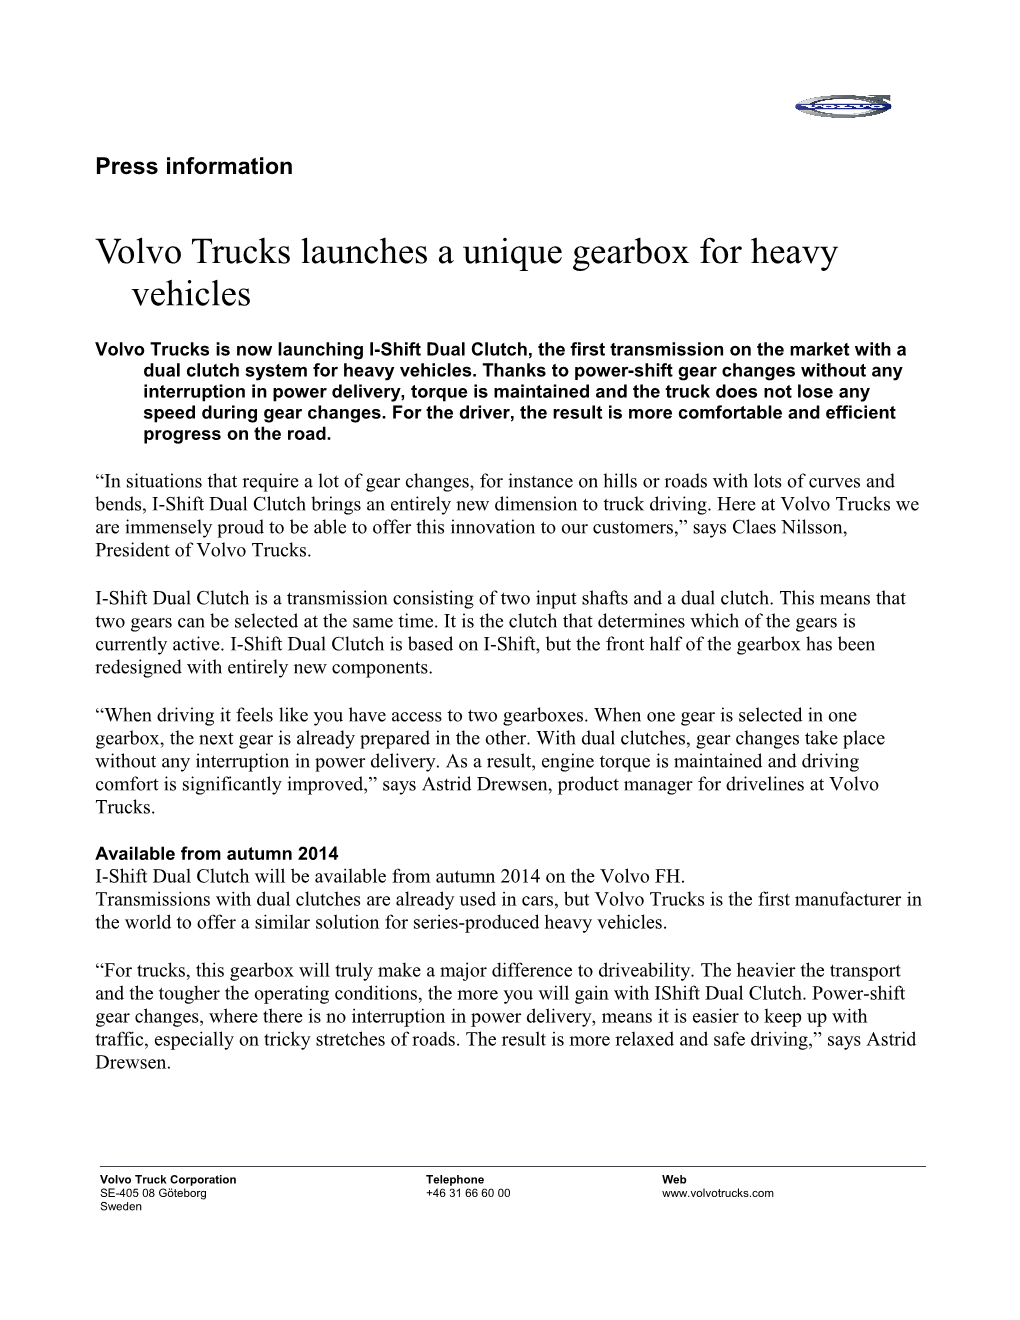 Volvo Trucks Launches a Unique Gearbox for Heavy Vehicles